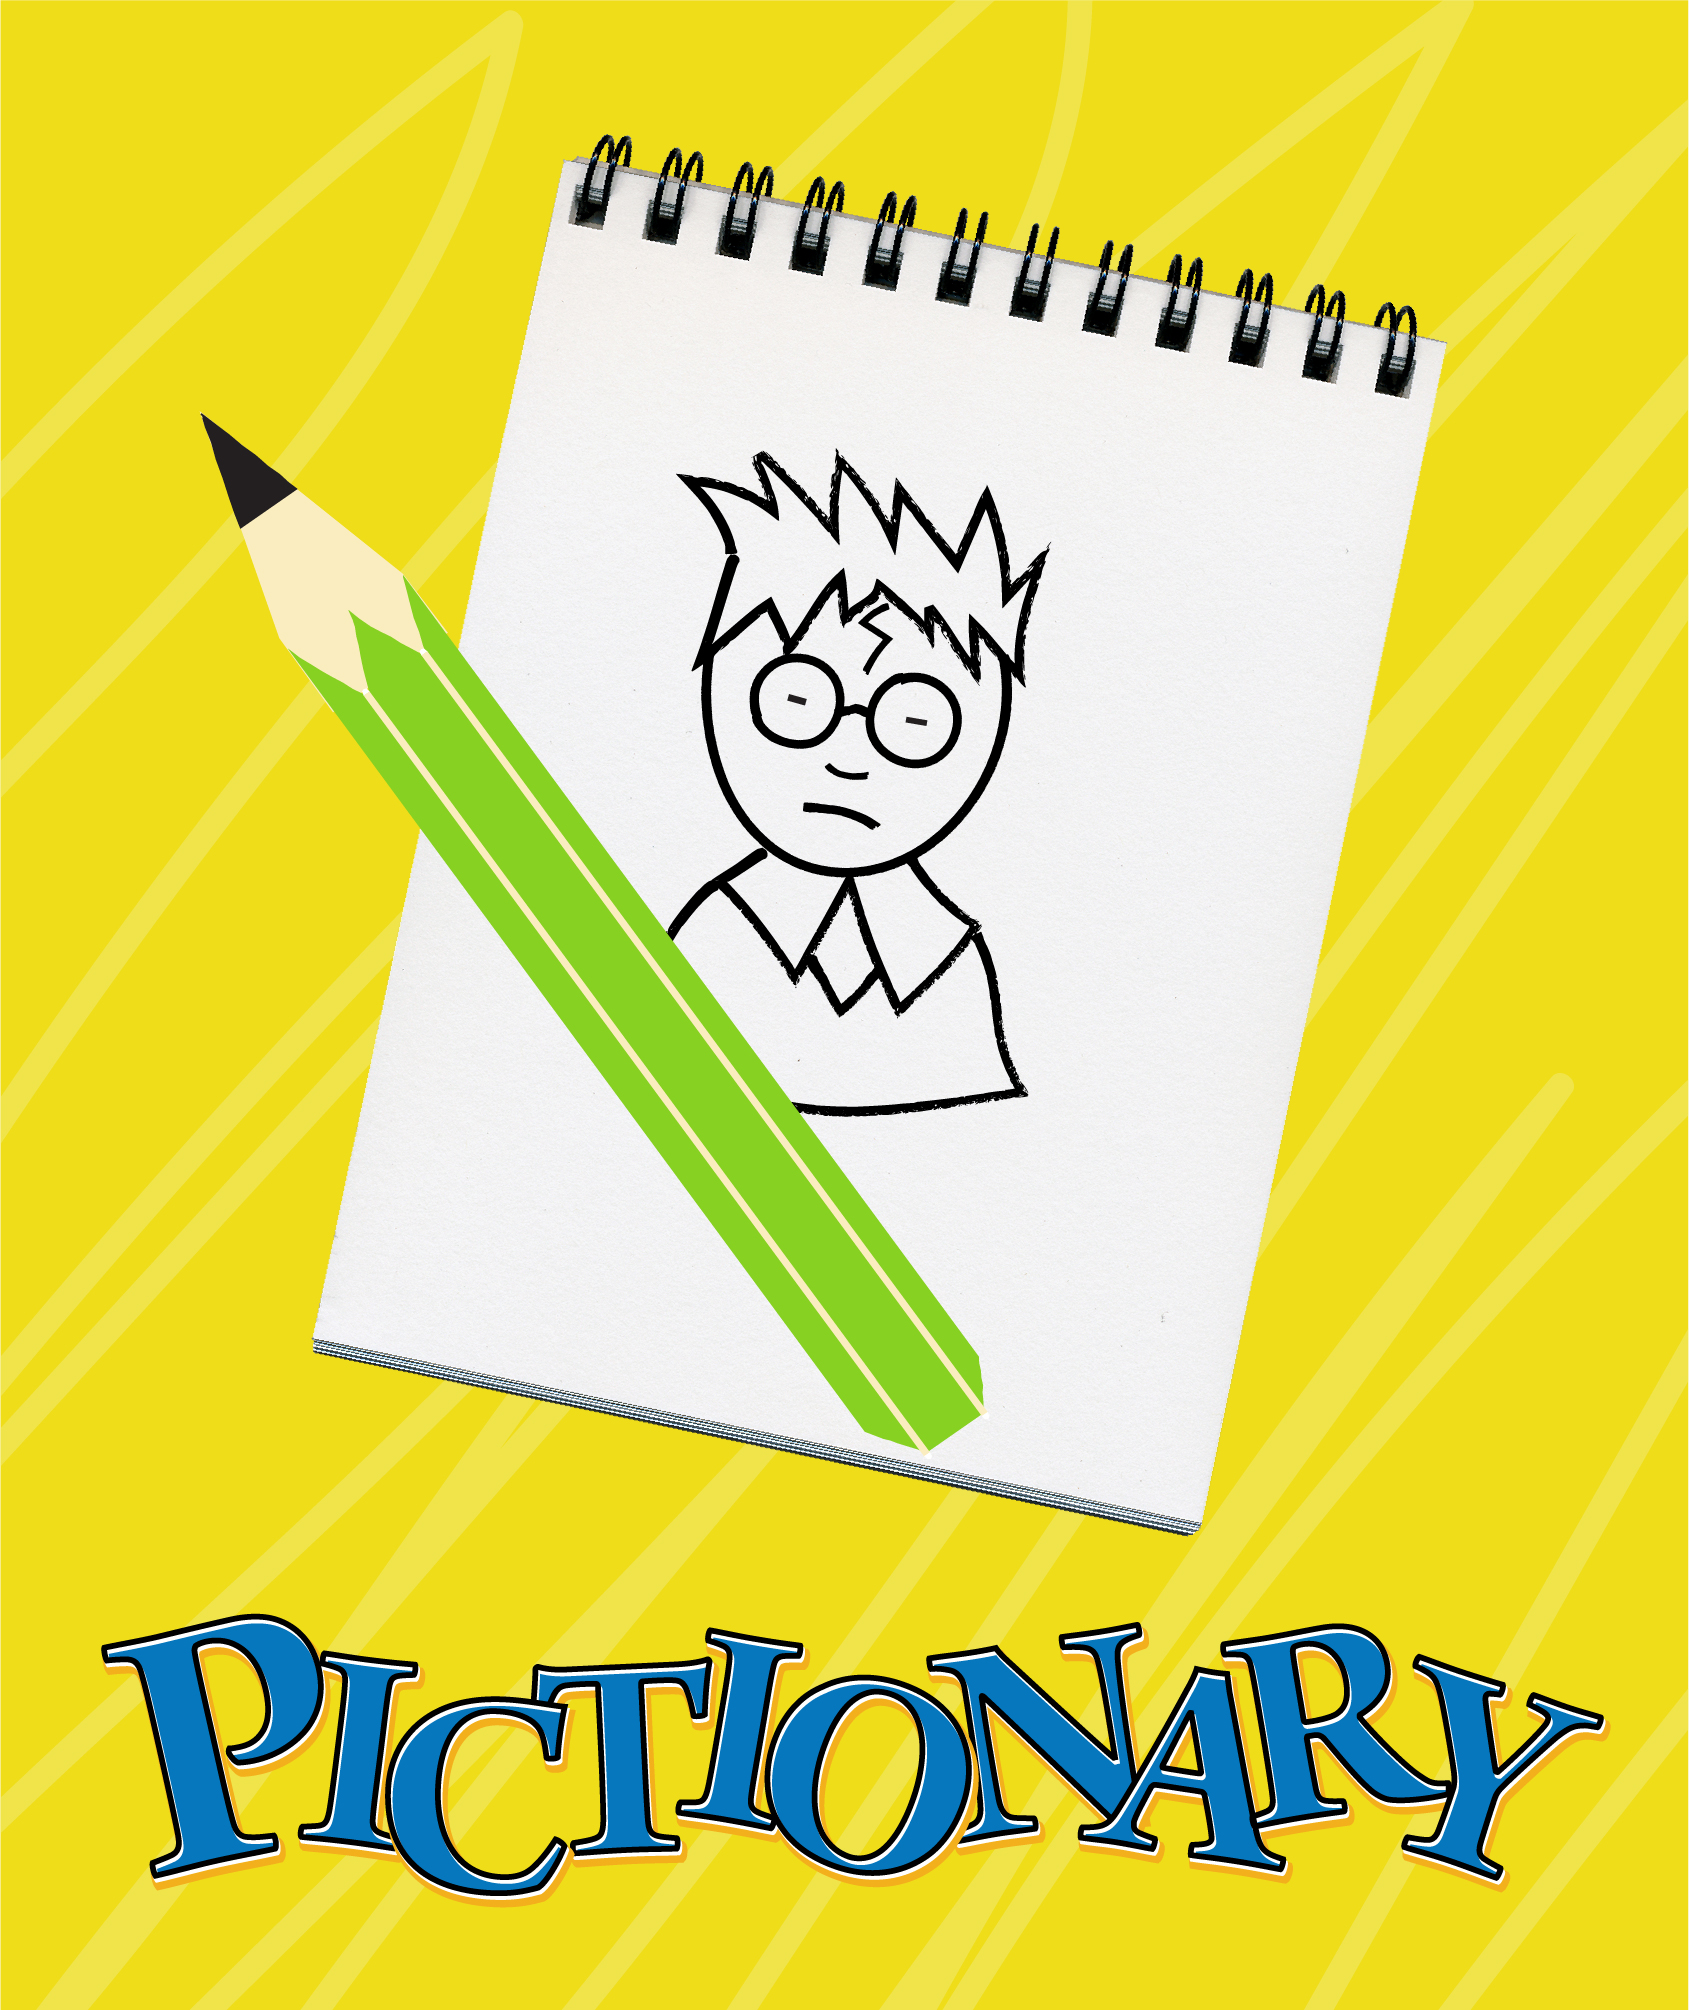 It's a online Pictionary that you can play with friends or strangers.